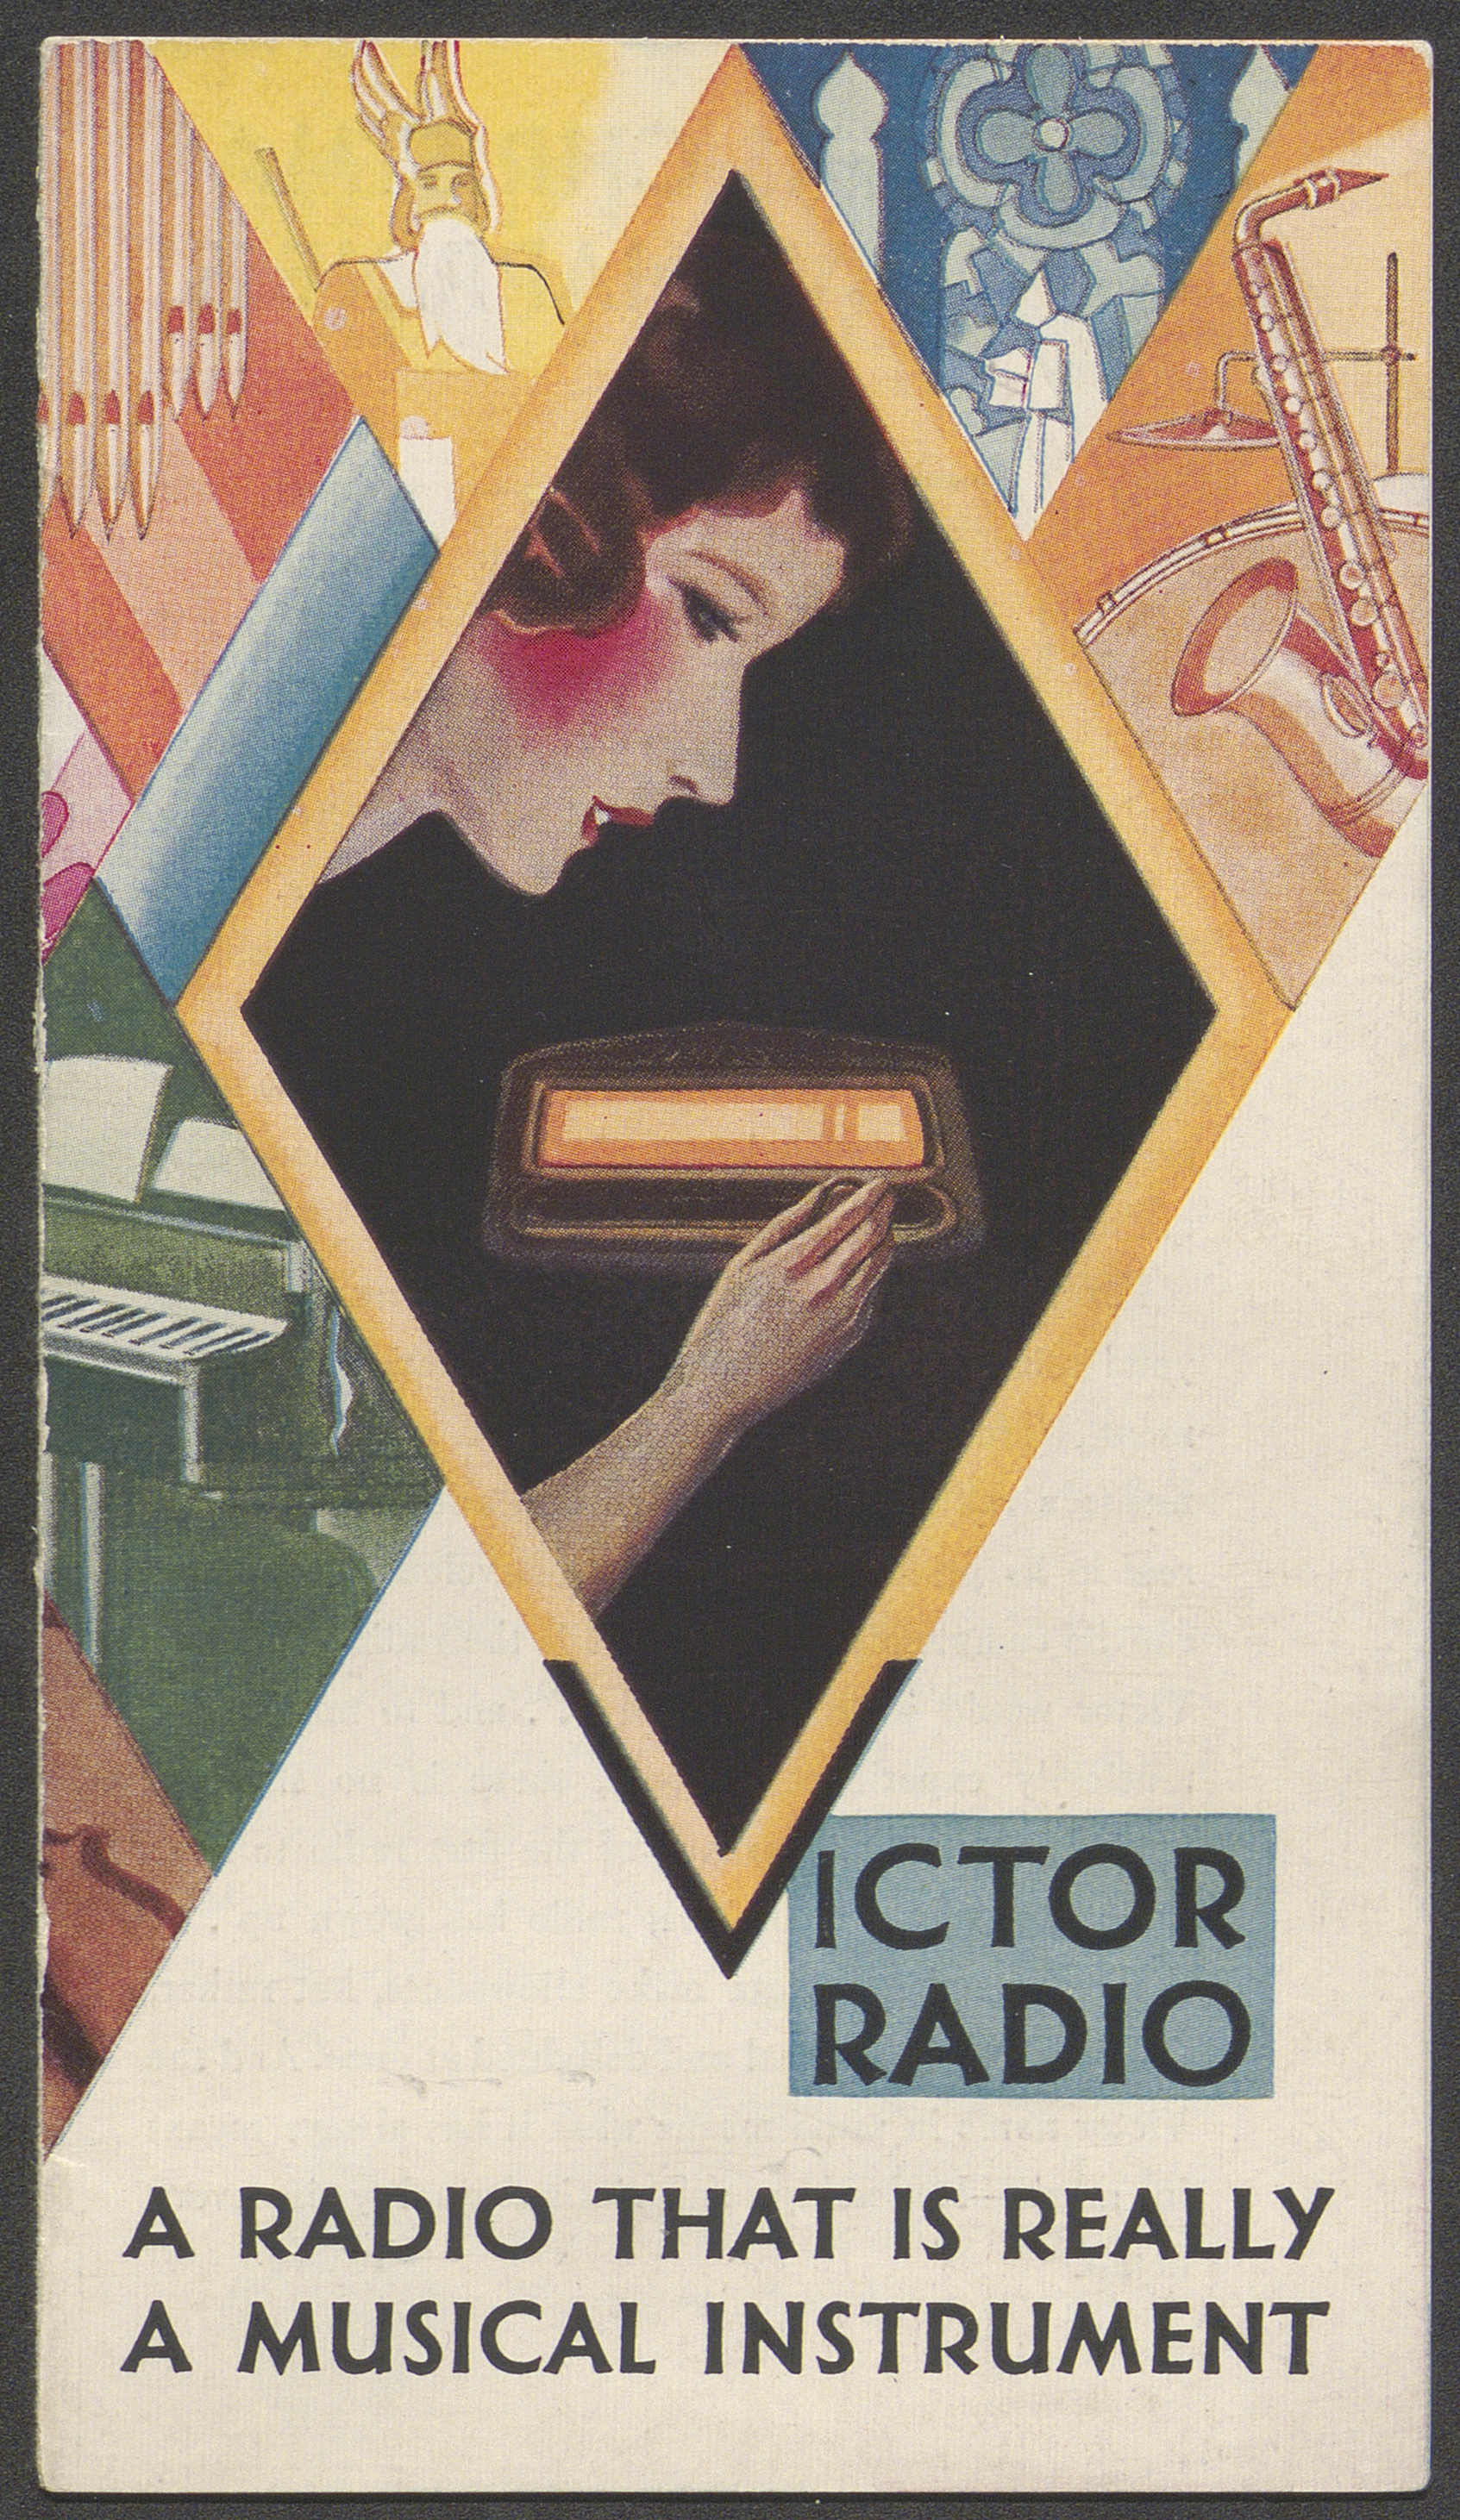 Catalog cover for Victor Radio. Colorful illustrations related to music and a woman tuning a radio.